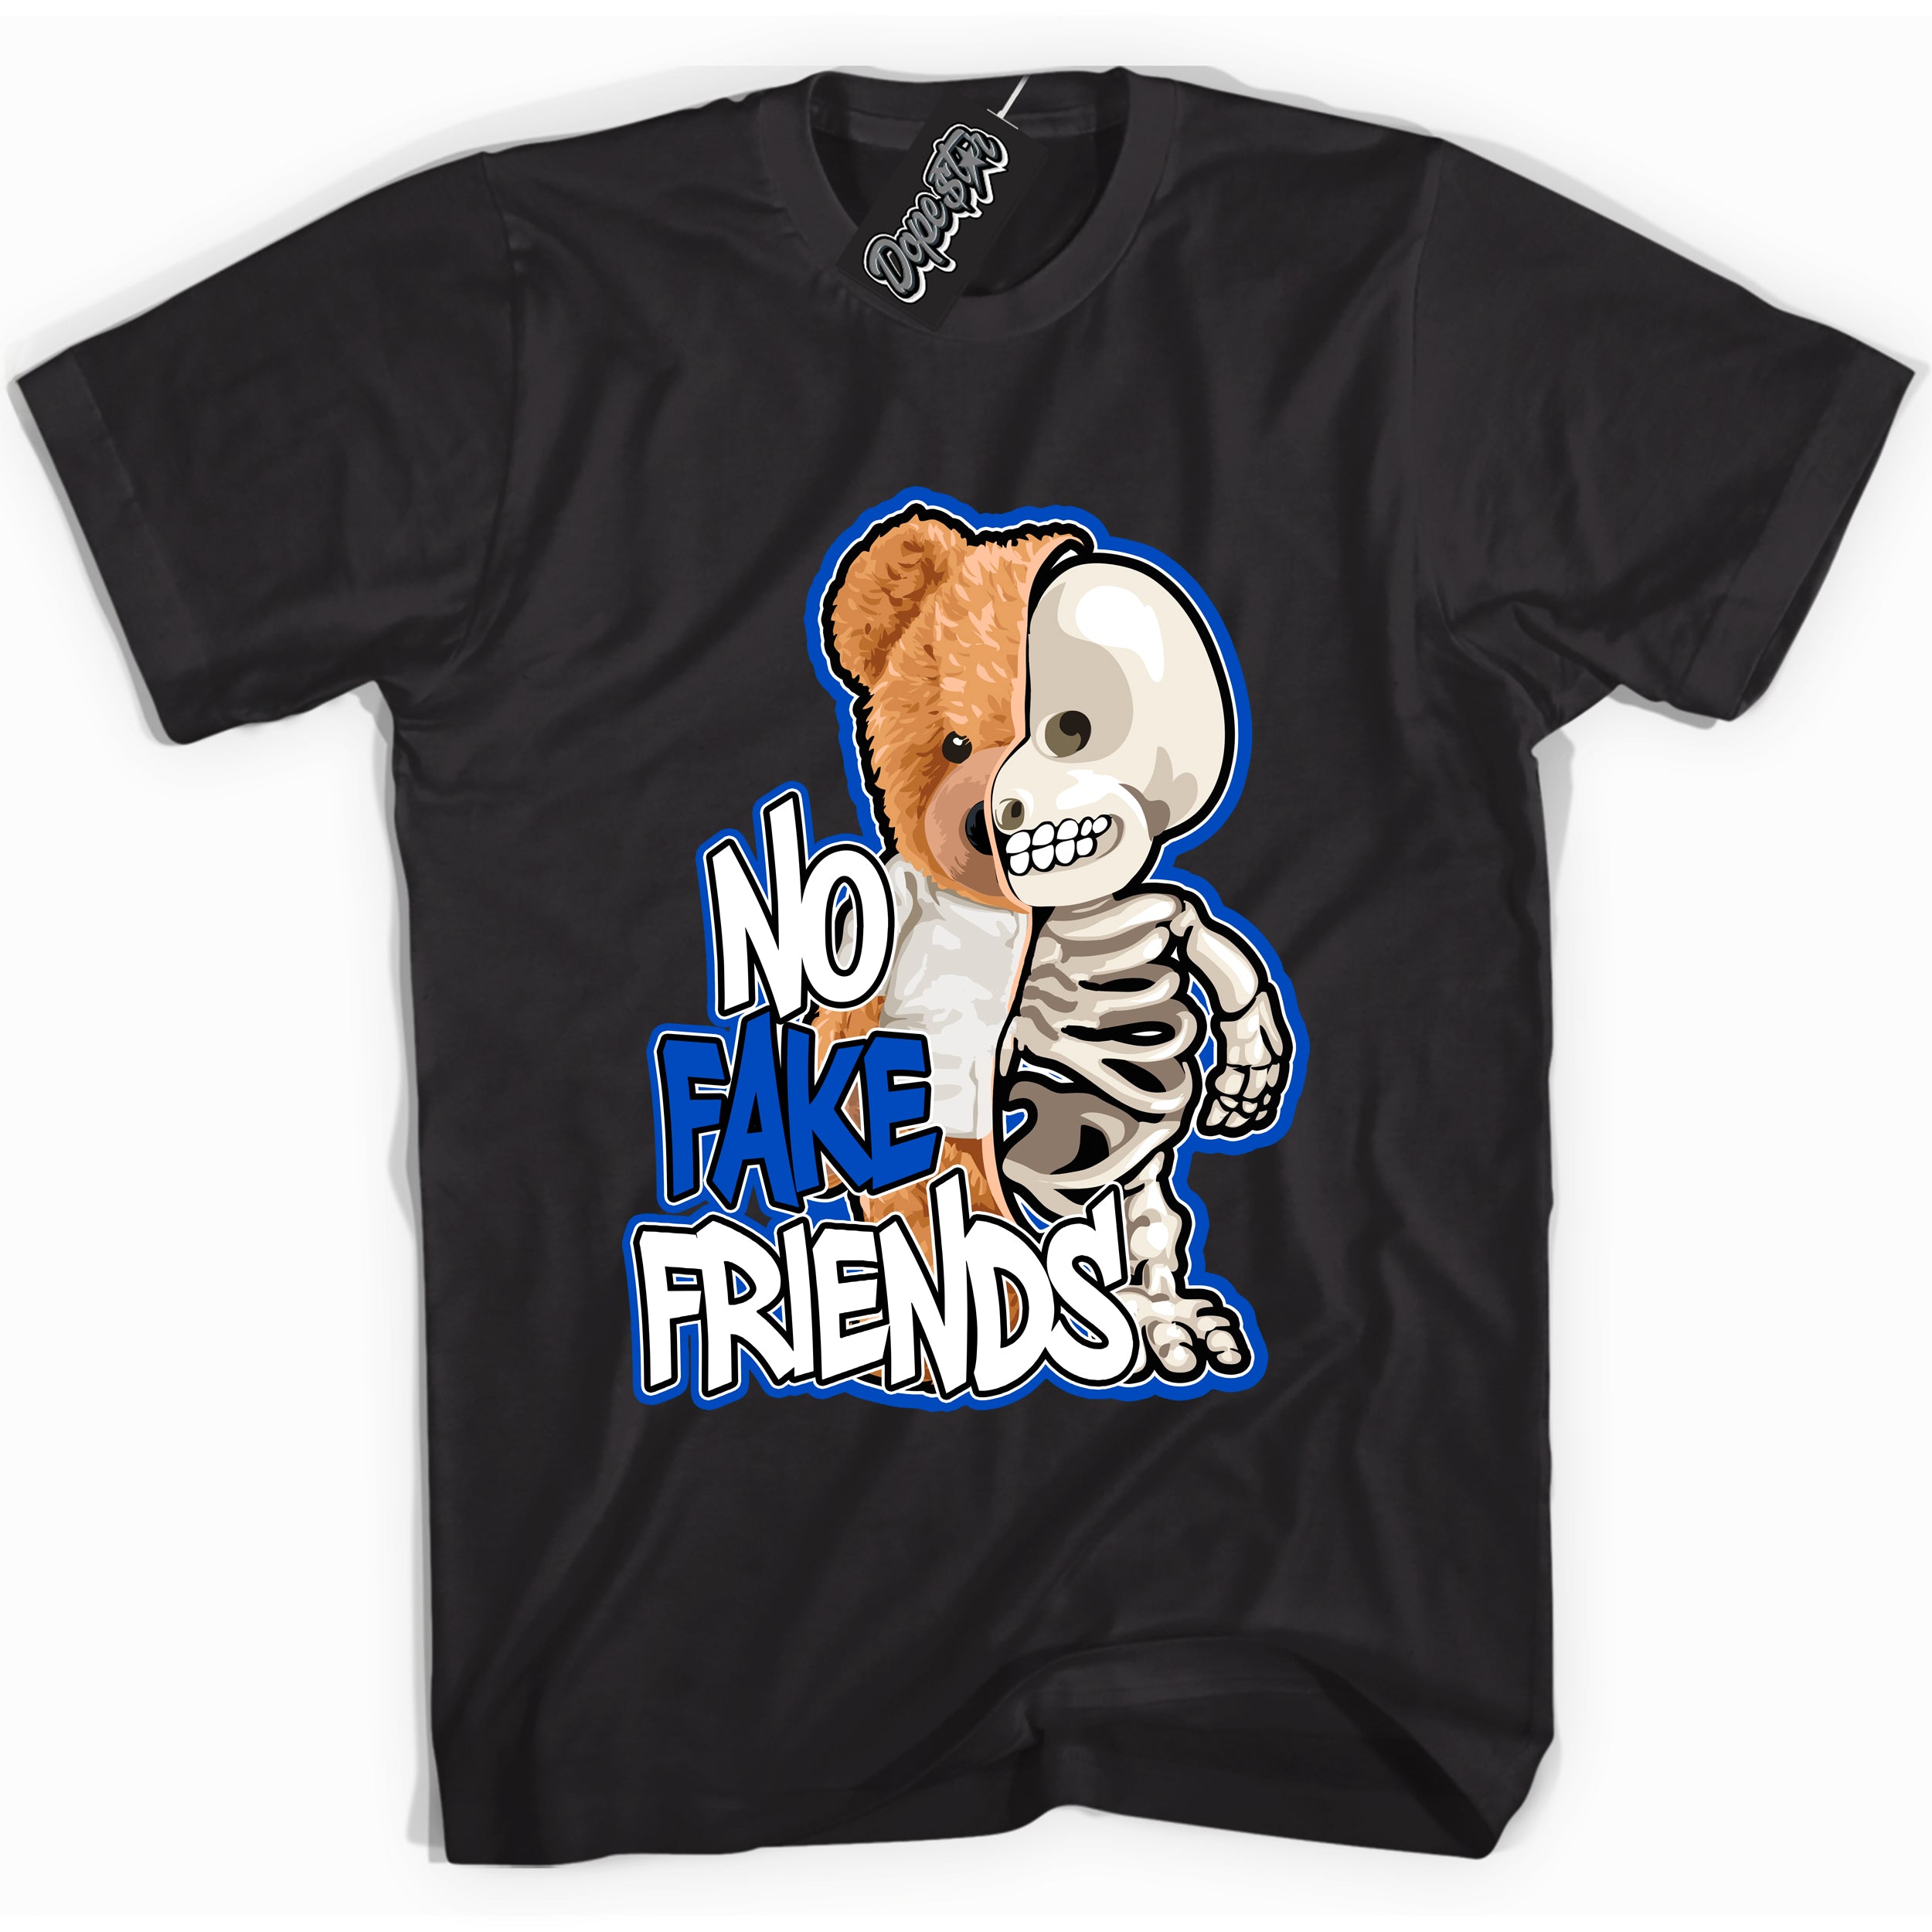 Cool Black graphic tee with No Fake Friends print, that perfectly matches OG Royal Reimagined 1s sneakers 